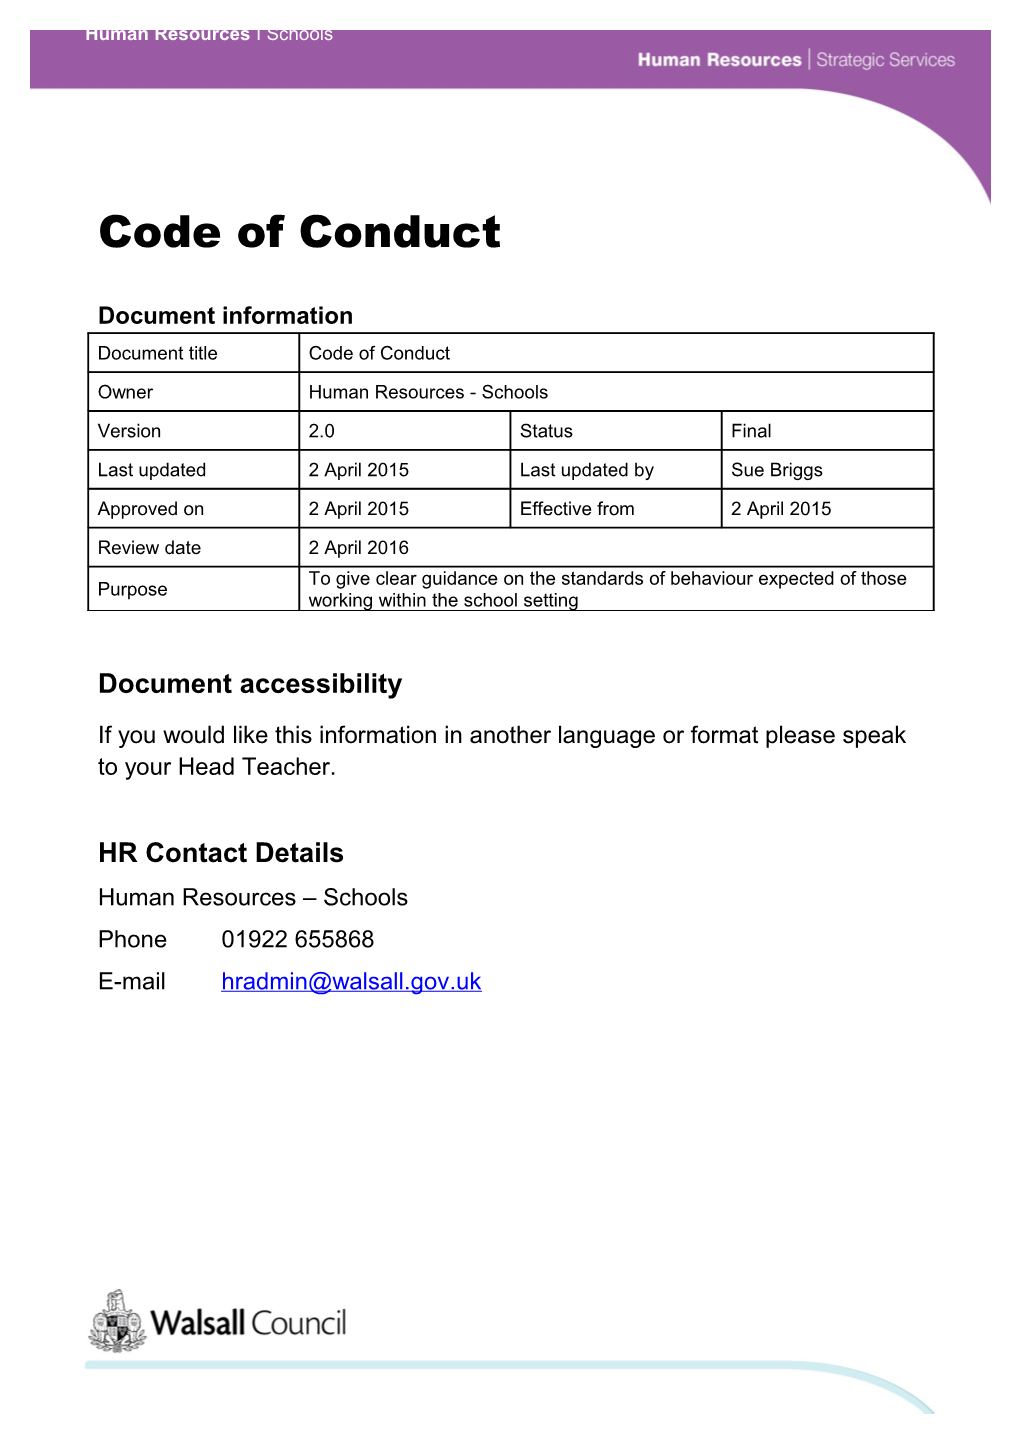 Human Resources Schools Code of Conduct